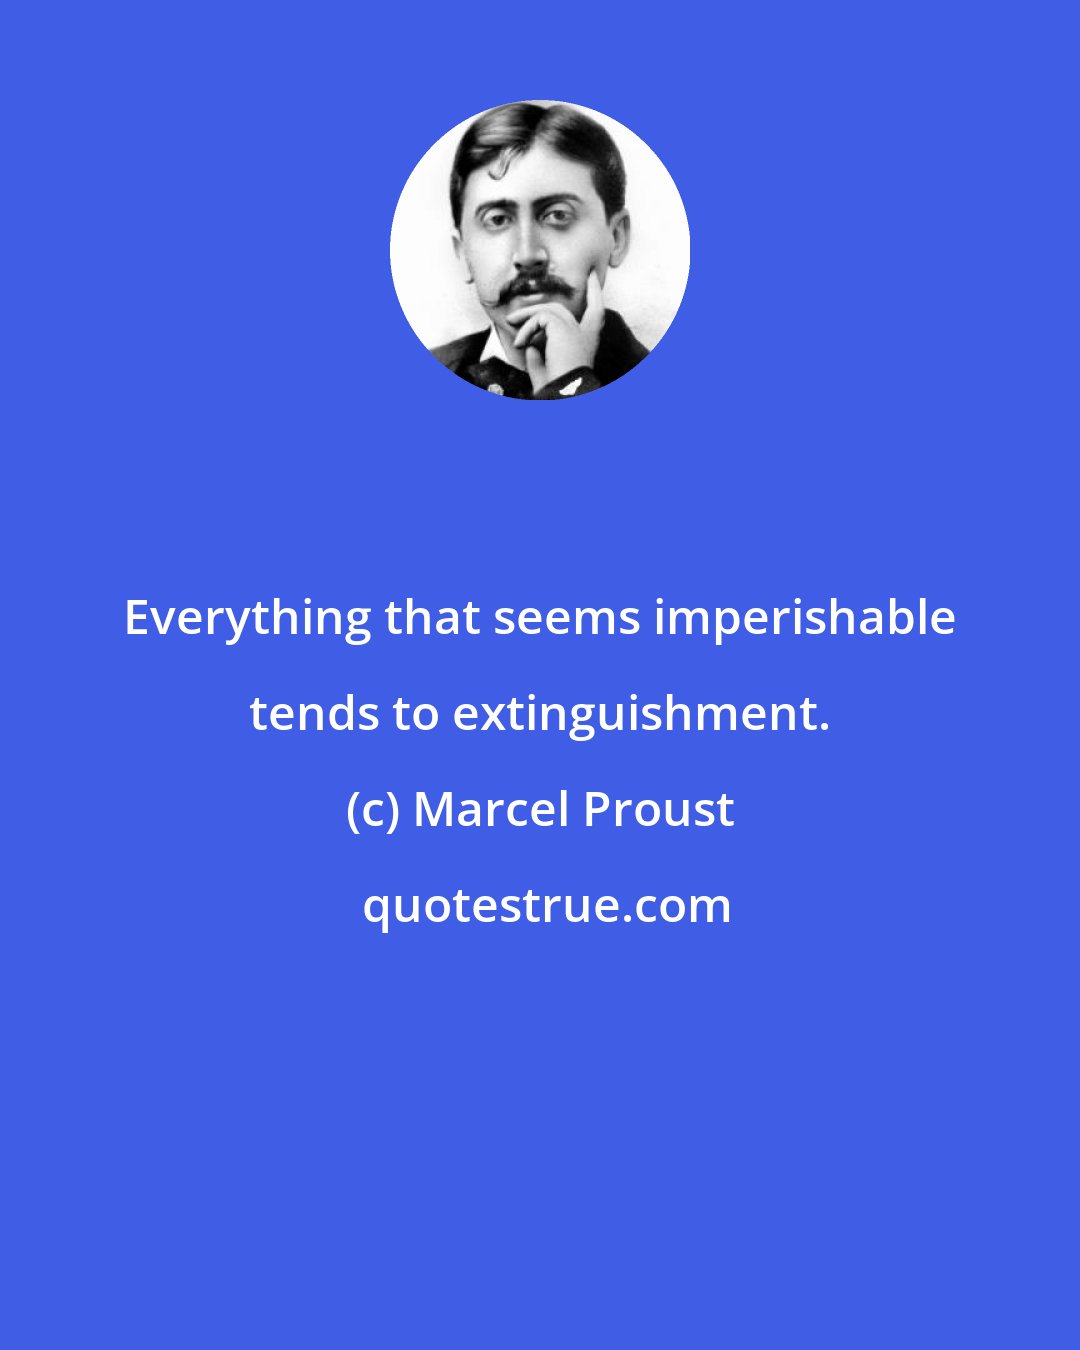 Marcel Proust: Everything that seems imperishable tends to extinguishment.